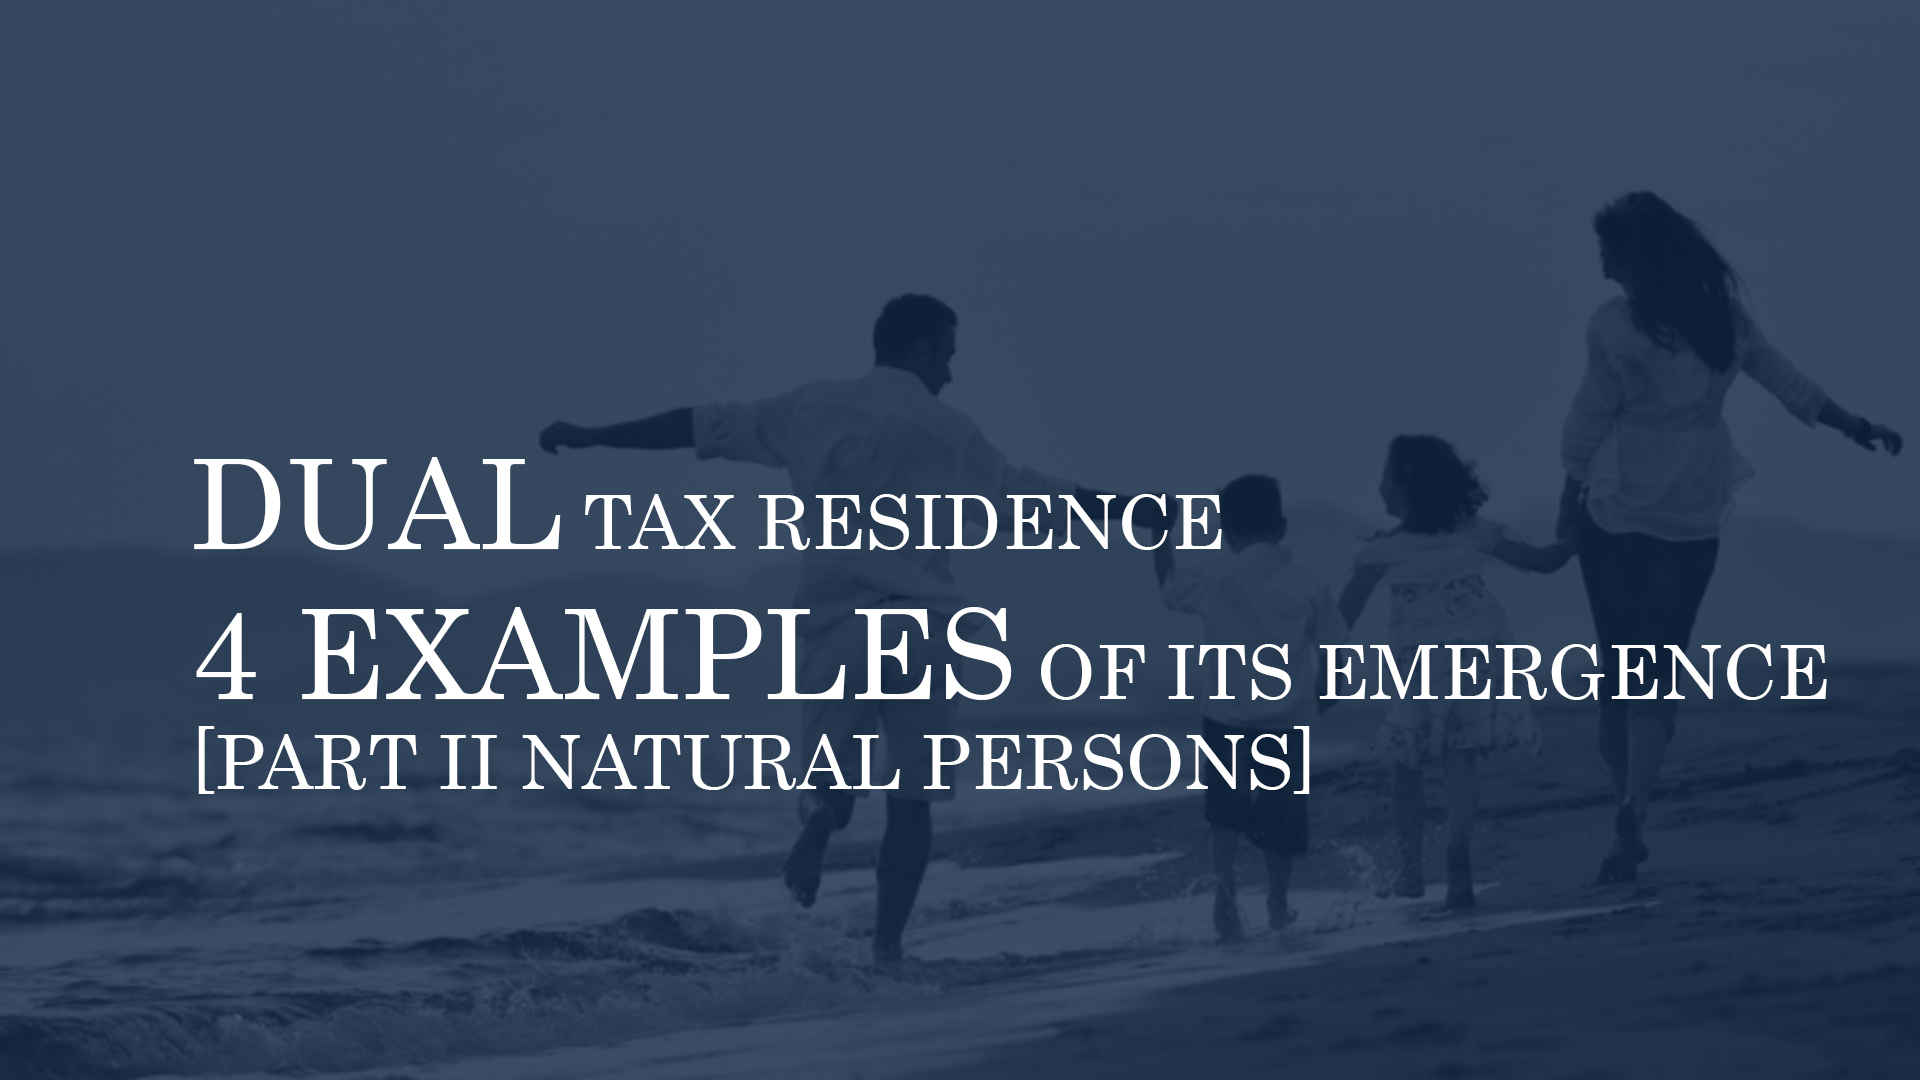 DUAL TAX RESIDENCE - 4 EXAMPLES OF ITS EMERGENCE [PART II NATURAL PERSONS]